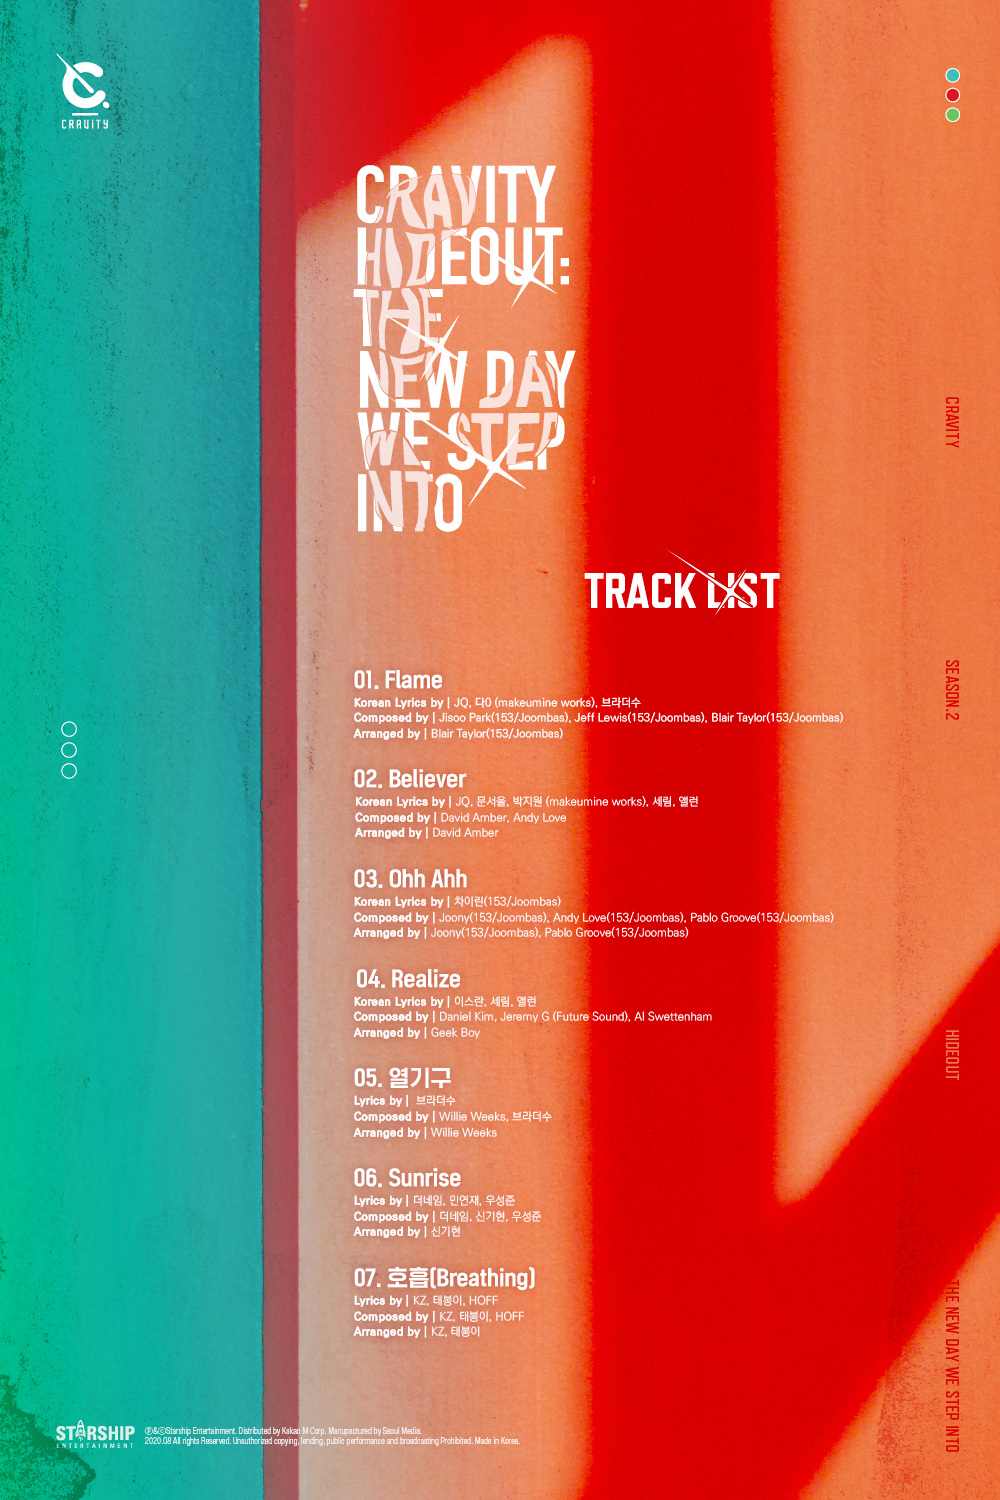 CRAVITY SEASON 2 <HIDEOUT> THE NEW DAY WE STEP INTO TRACK LIST  #CRAVITY #크래비티 #HIDEOUT #THE_NEW_DAY_WE_STEP_INTO